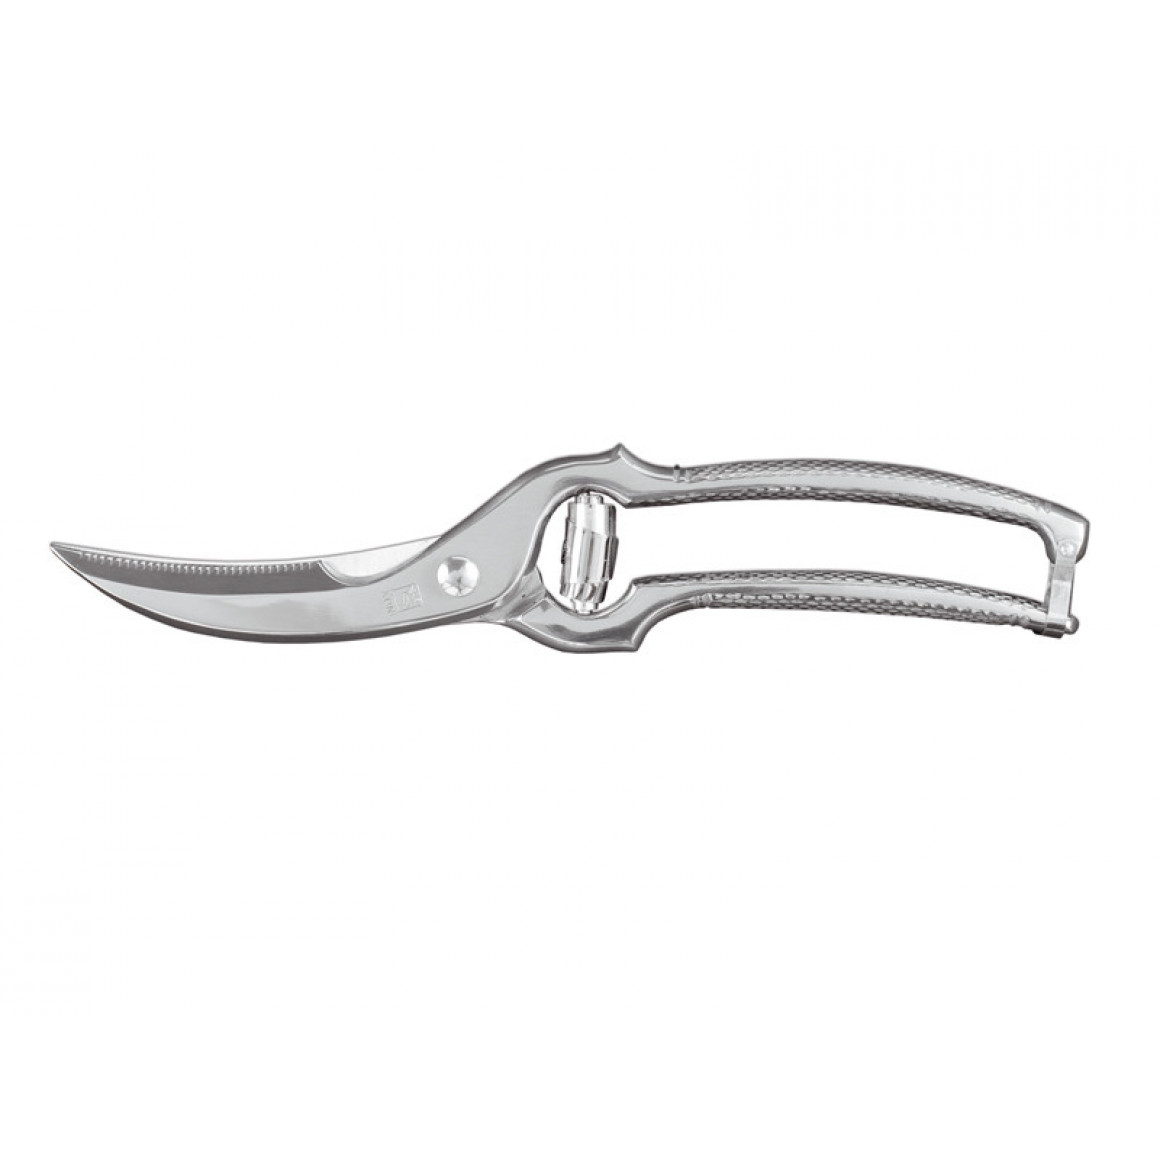 Poultry shears, bright stainless steel/L25